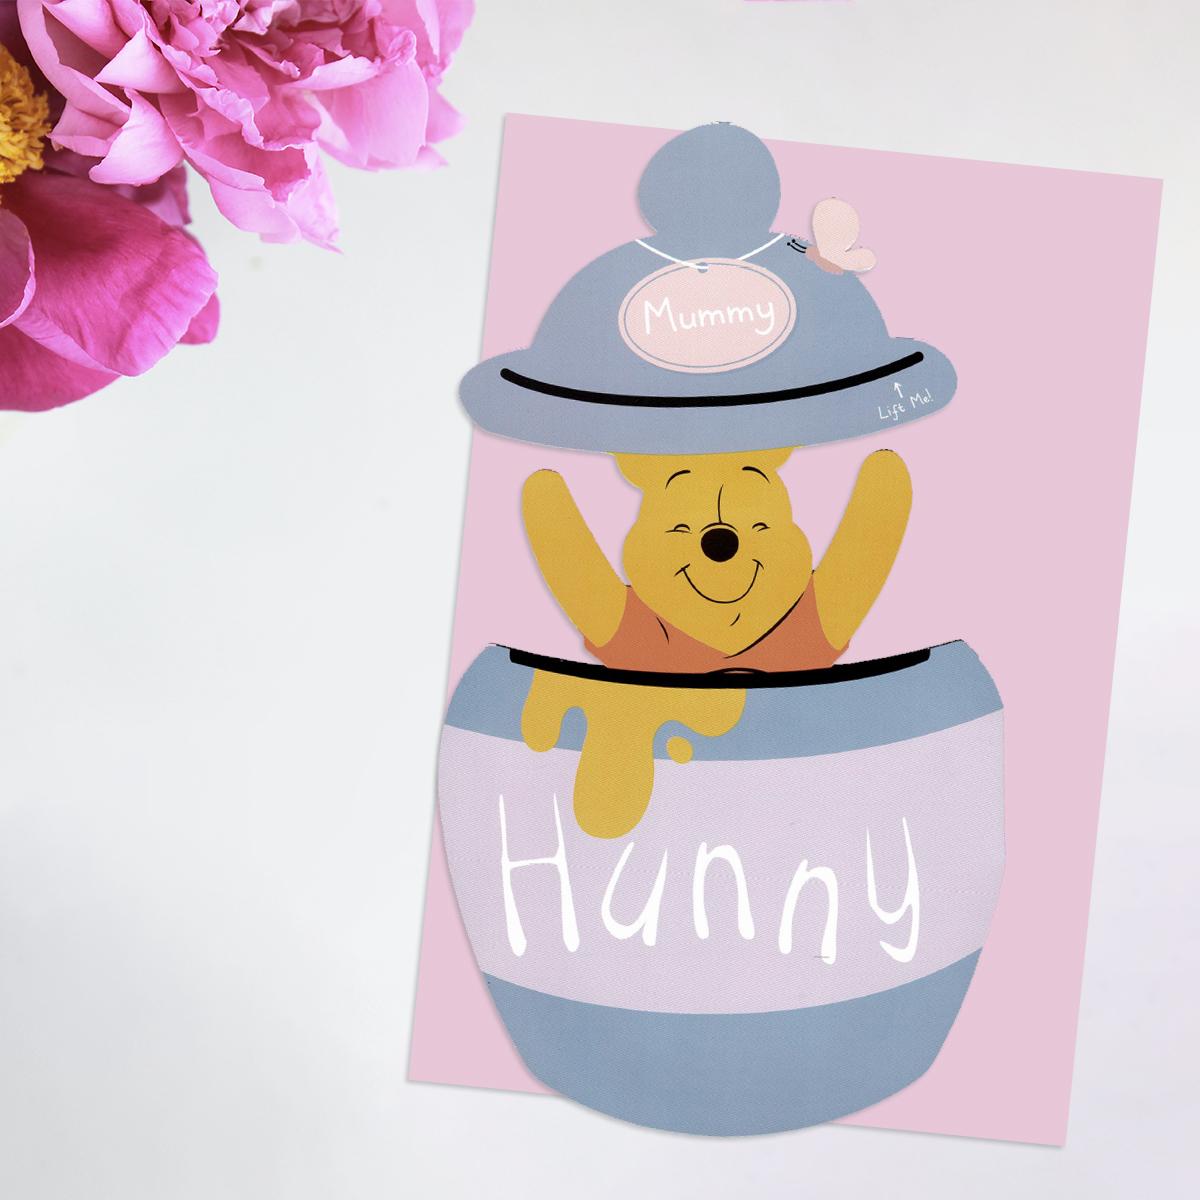 Mummy Winnie The Pooh Mother's Day Card Alongside Its Light Pink Envelope